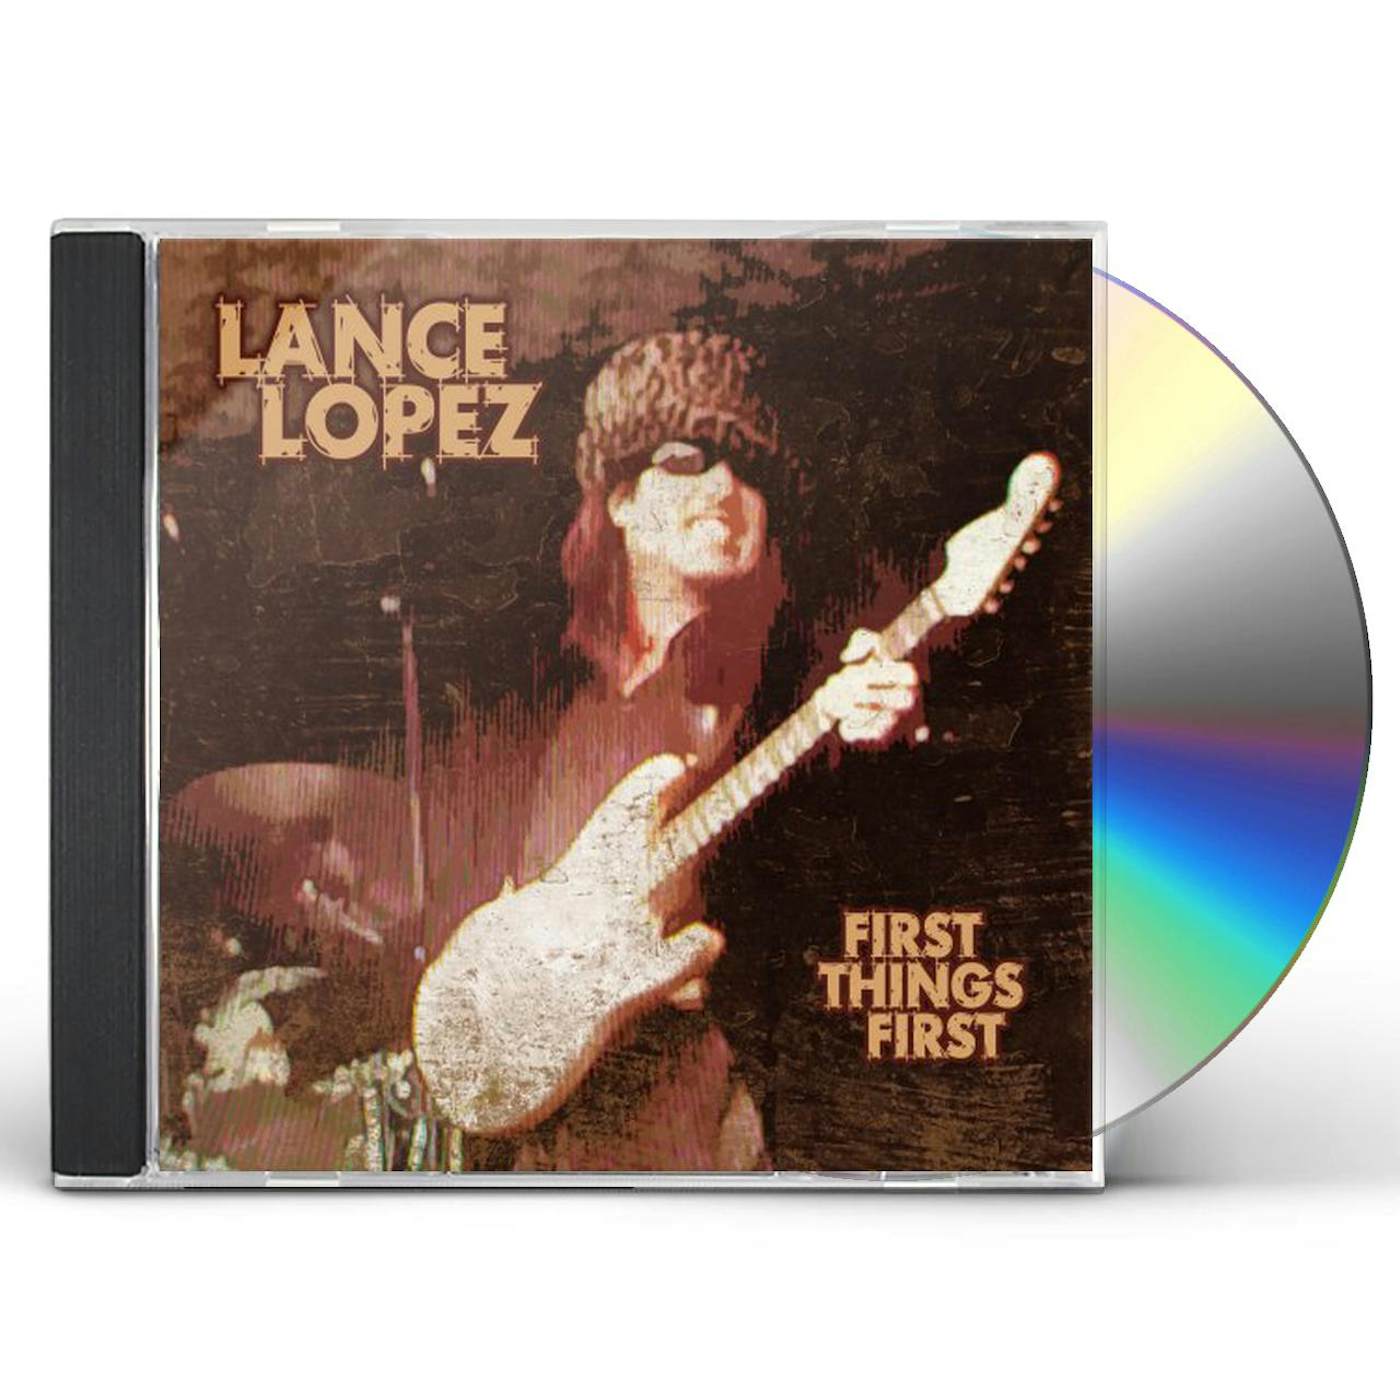 Lance Lopez FIRST THINGS FIRST CD